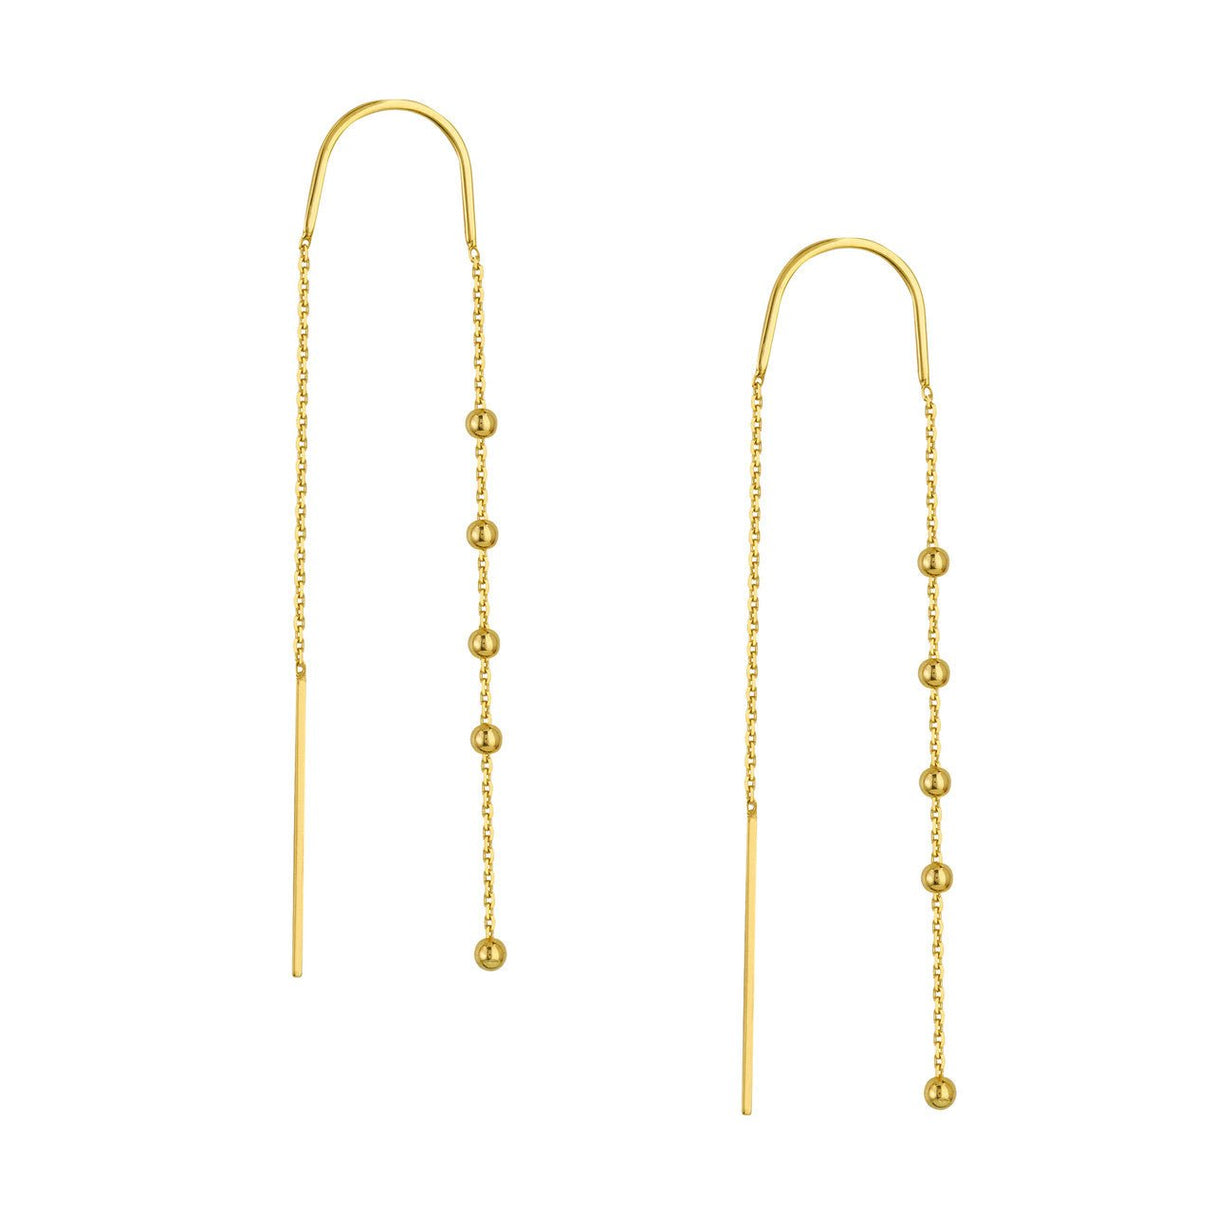 Add a touch of bohemian charm to your outfit with our bead accent chain earrings. These unique and stylish earrings feature delicate chains and colorful beads that dangle and catch the light beautifully. Perfect for any occasion, these earrings are sure to turn heads and add a pop of color to your look.